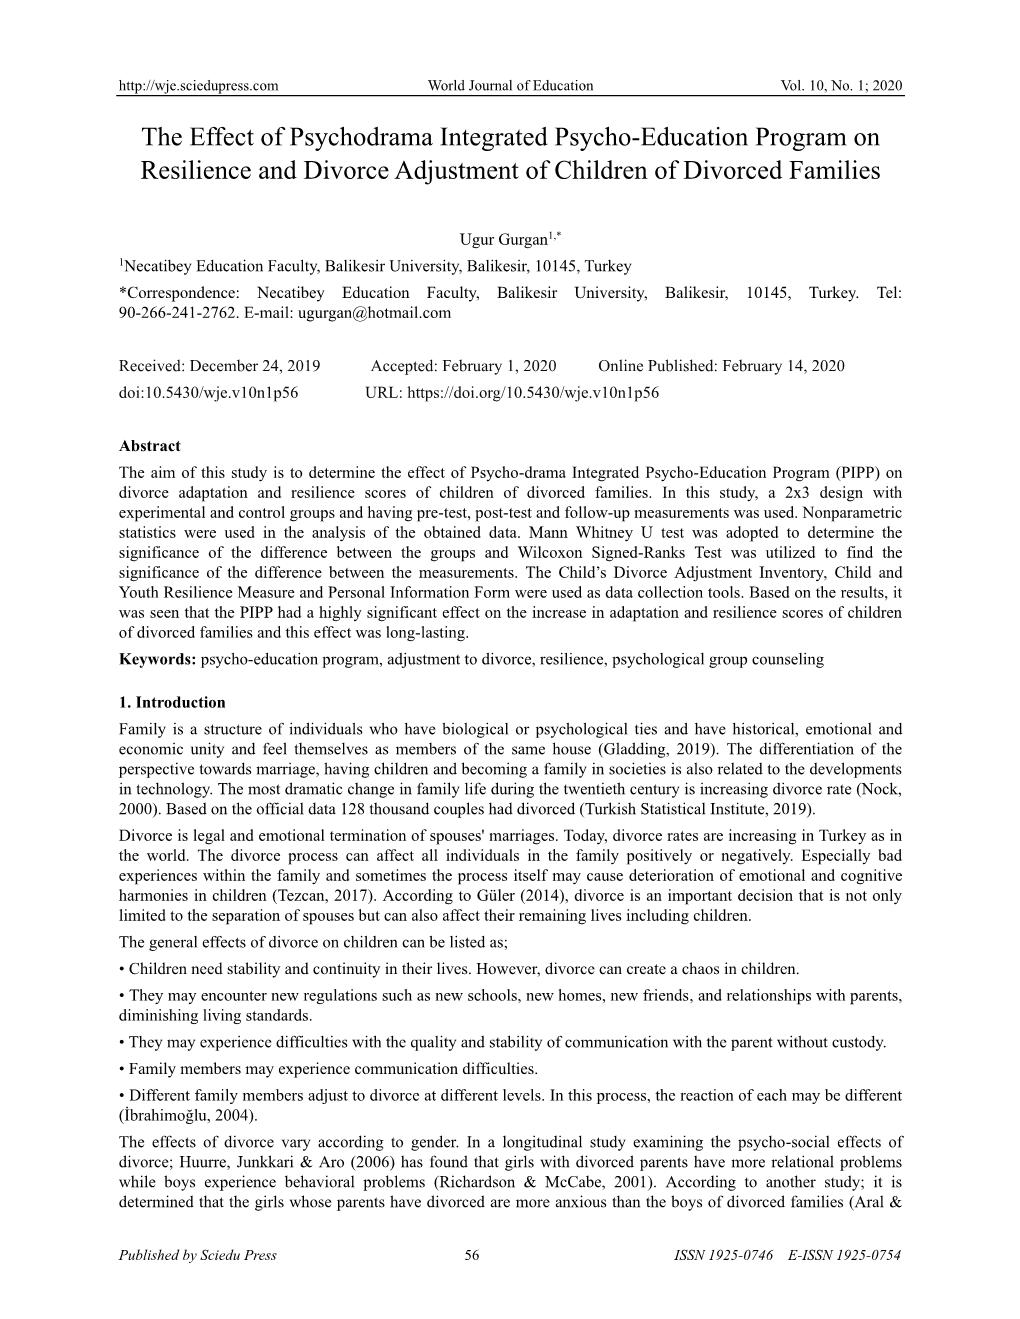 The Effect of Psychodrama Integrated Psycho-Education Program on Resilience and Divorce Adjustment of Children of Divorced Families